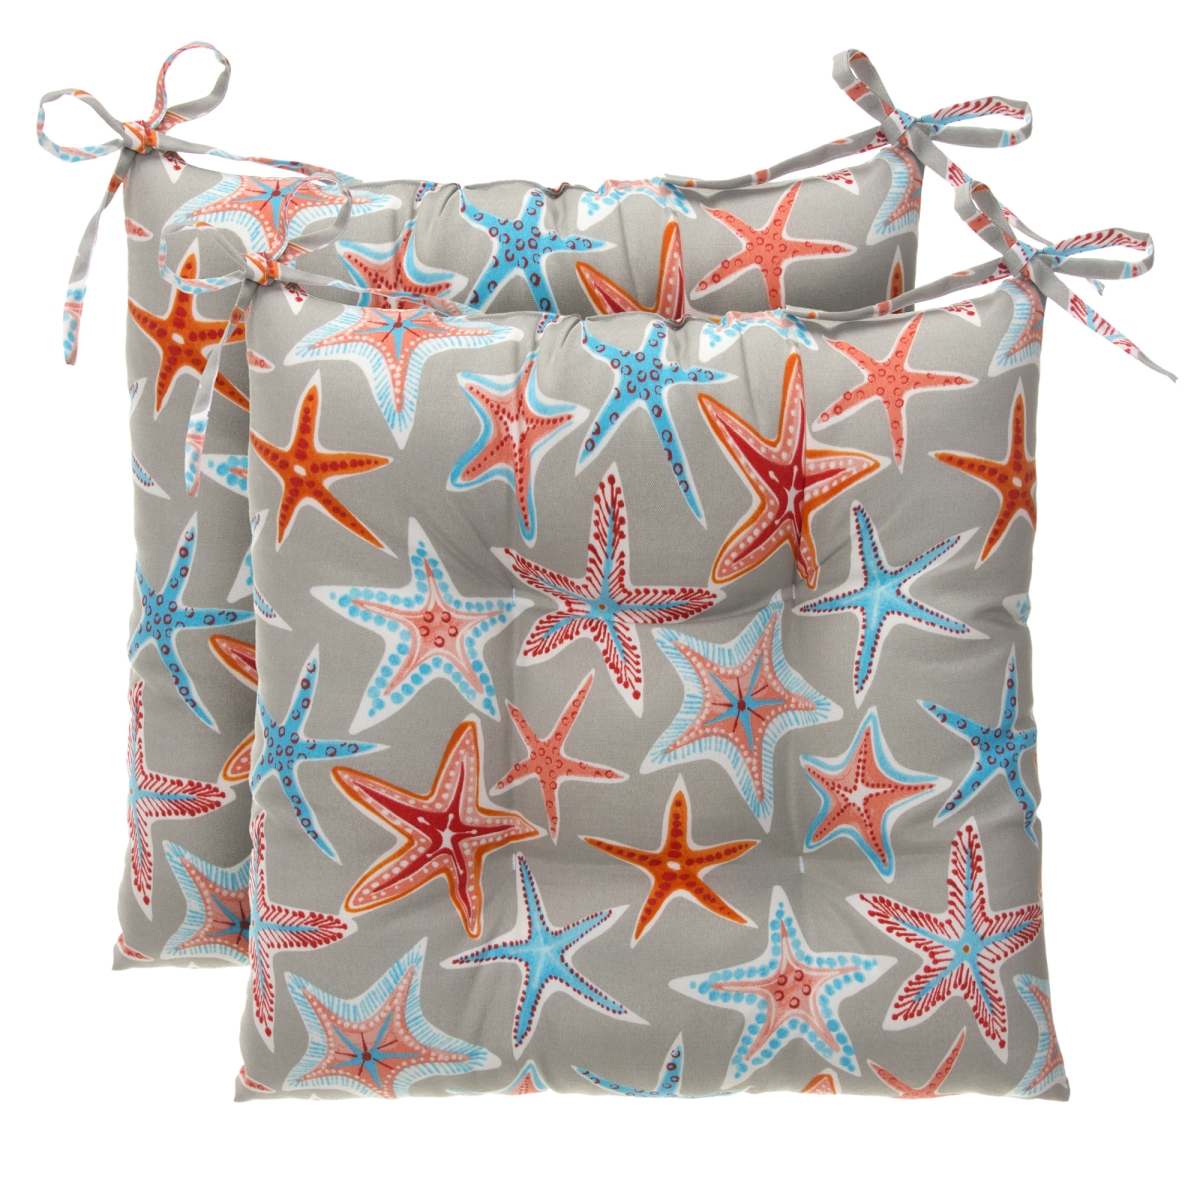 70128 Reach For The Stars Indoor & Outdoor Reversible Tufted Square Chair Cushion, Orange - Pack Of 2